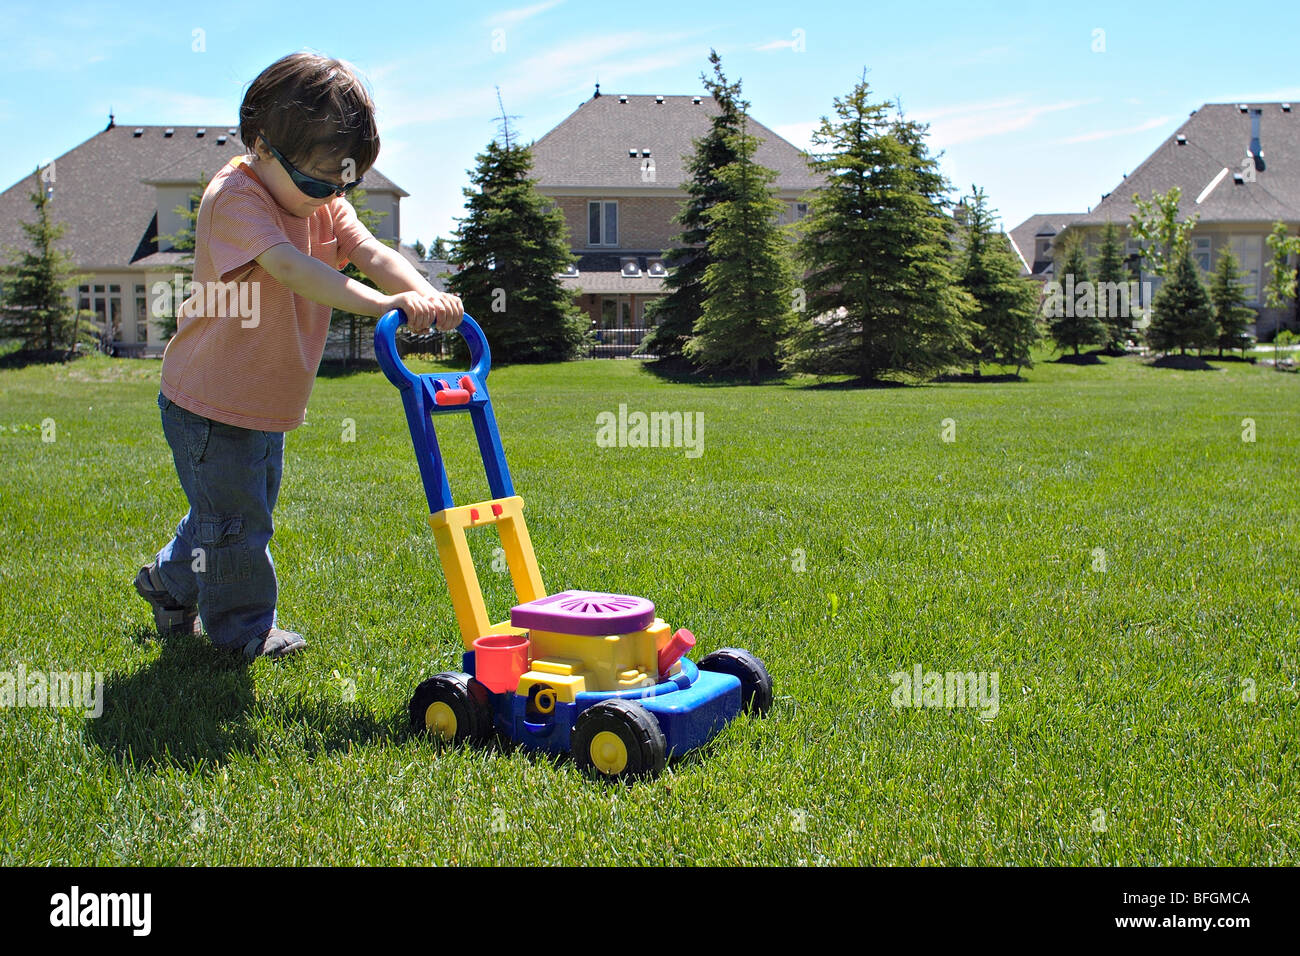 Young boy mowing lawn with toy mower, King City, Ontario Stock Photo